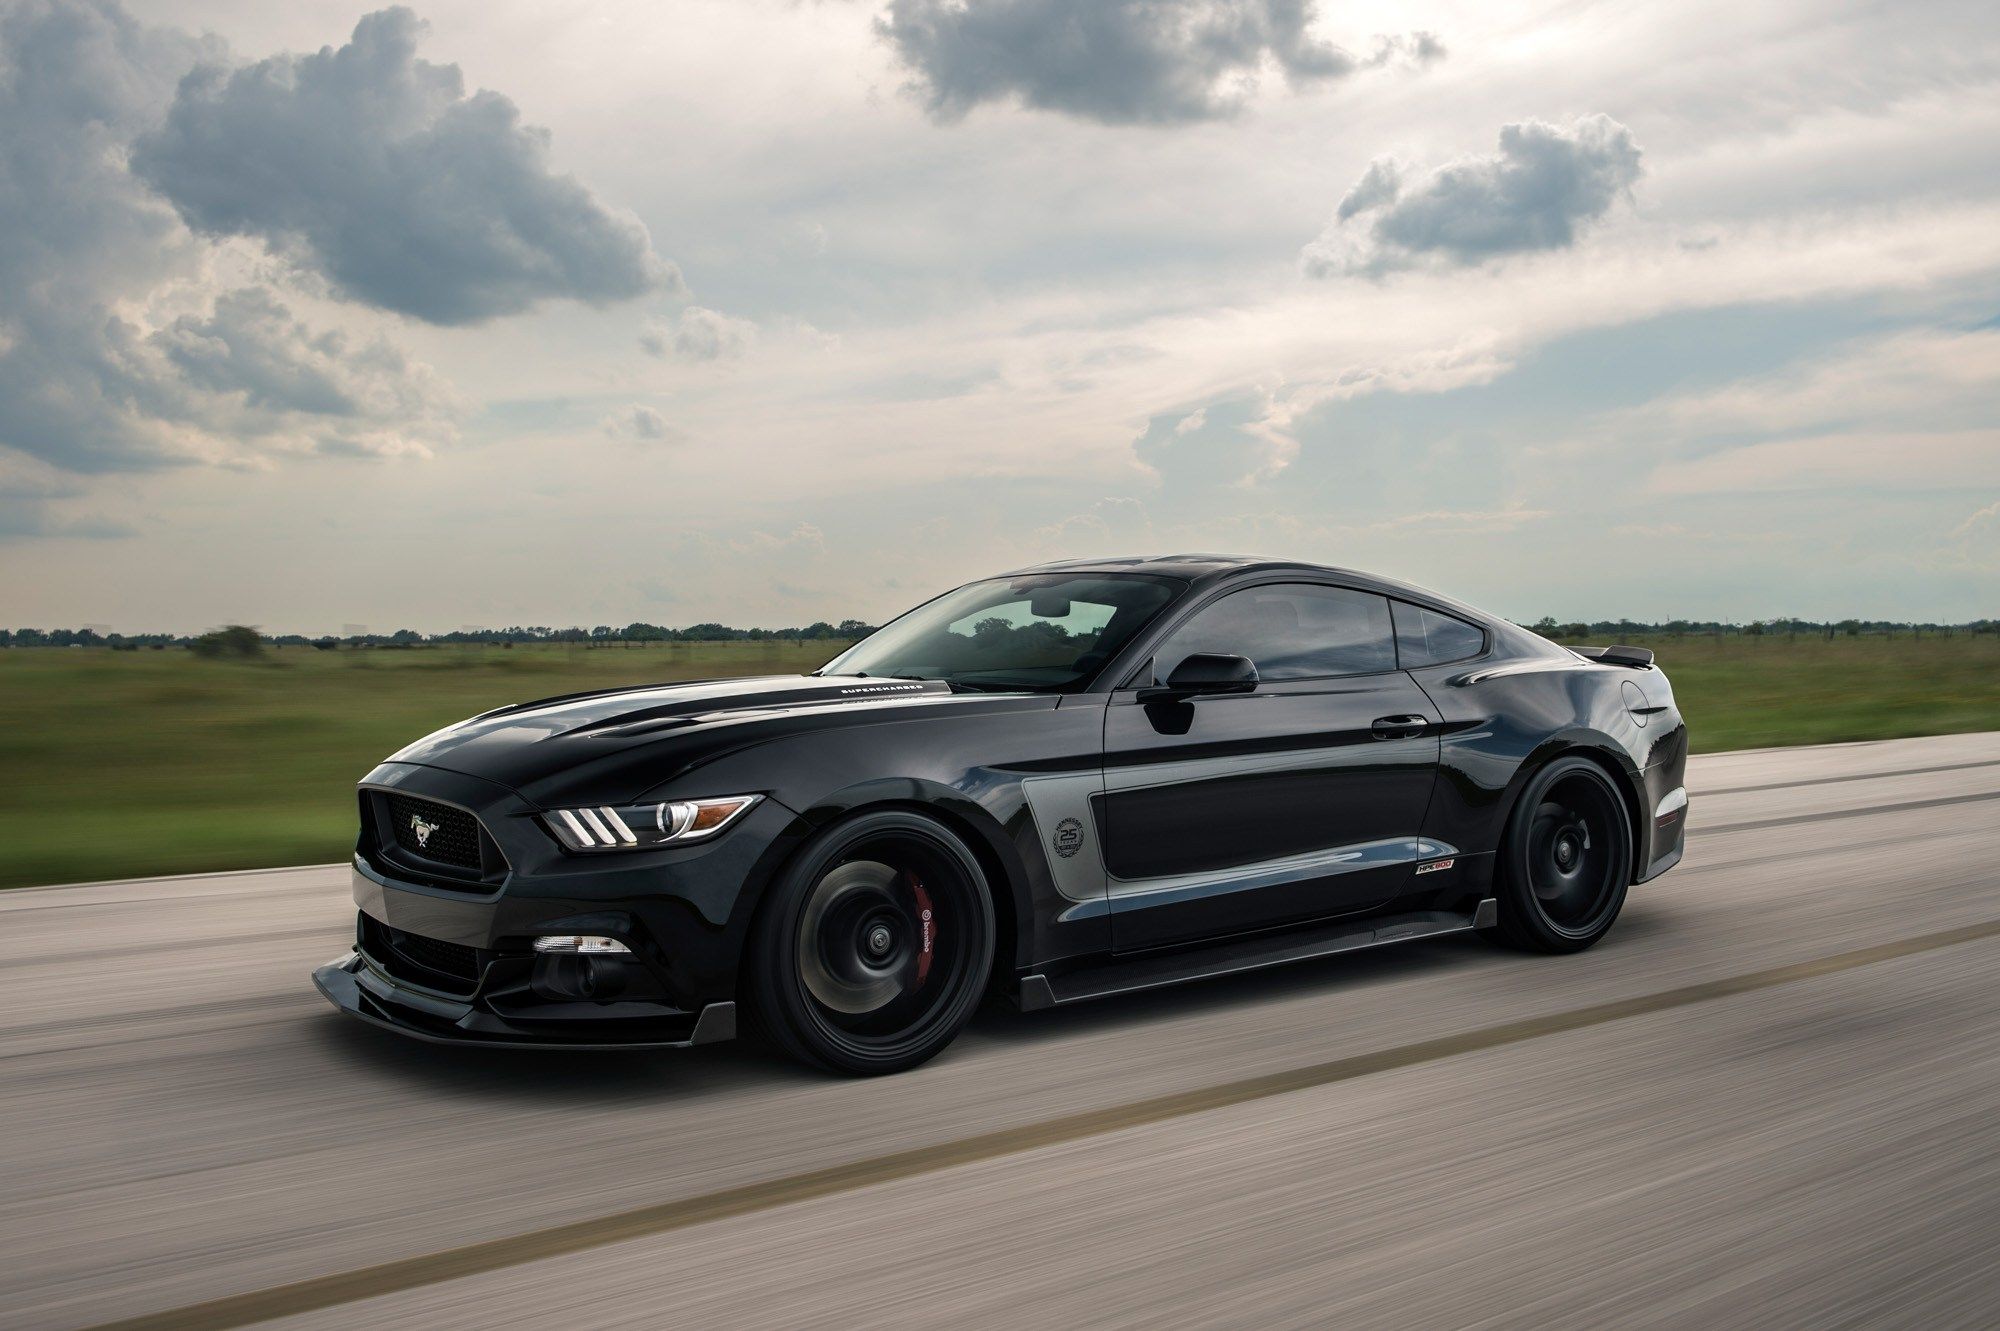 2016 Ford Mustang GT 25th Anniversary HPE800 Edition By Hennessey